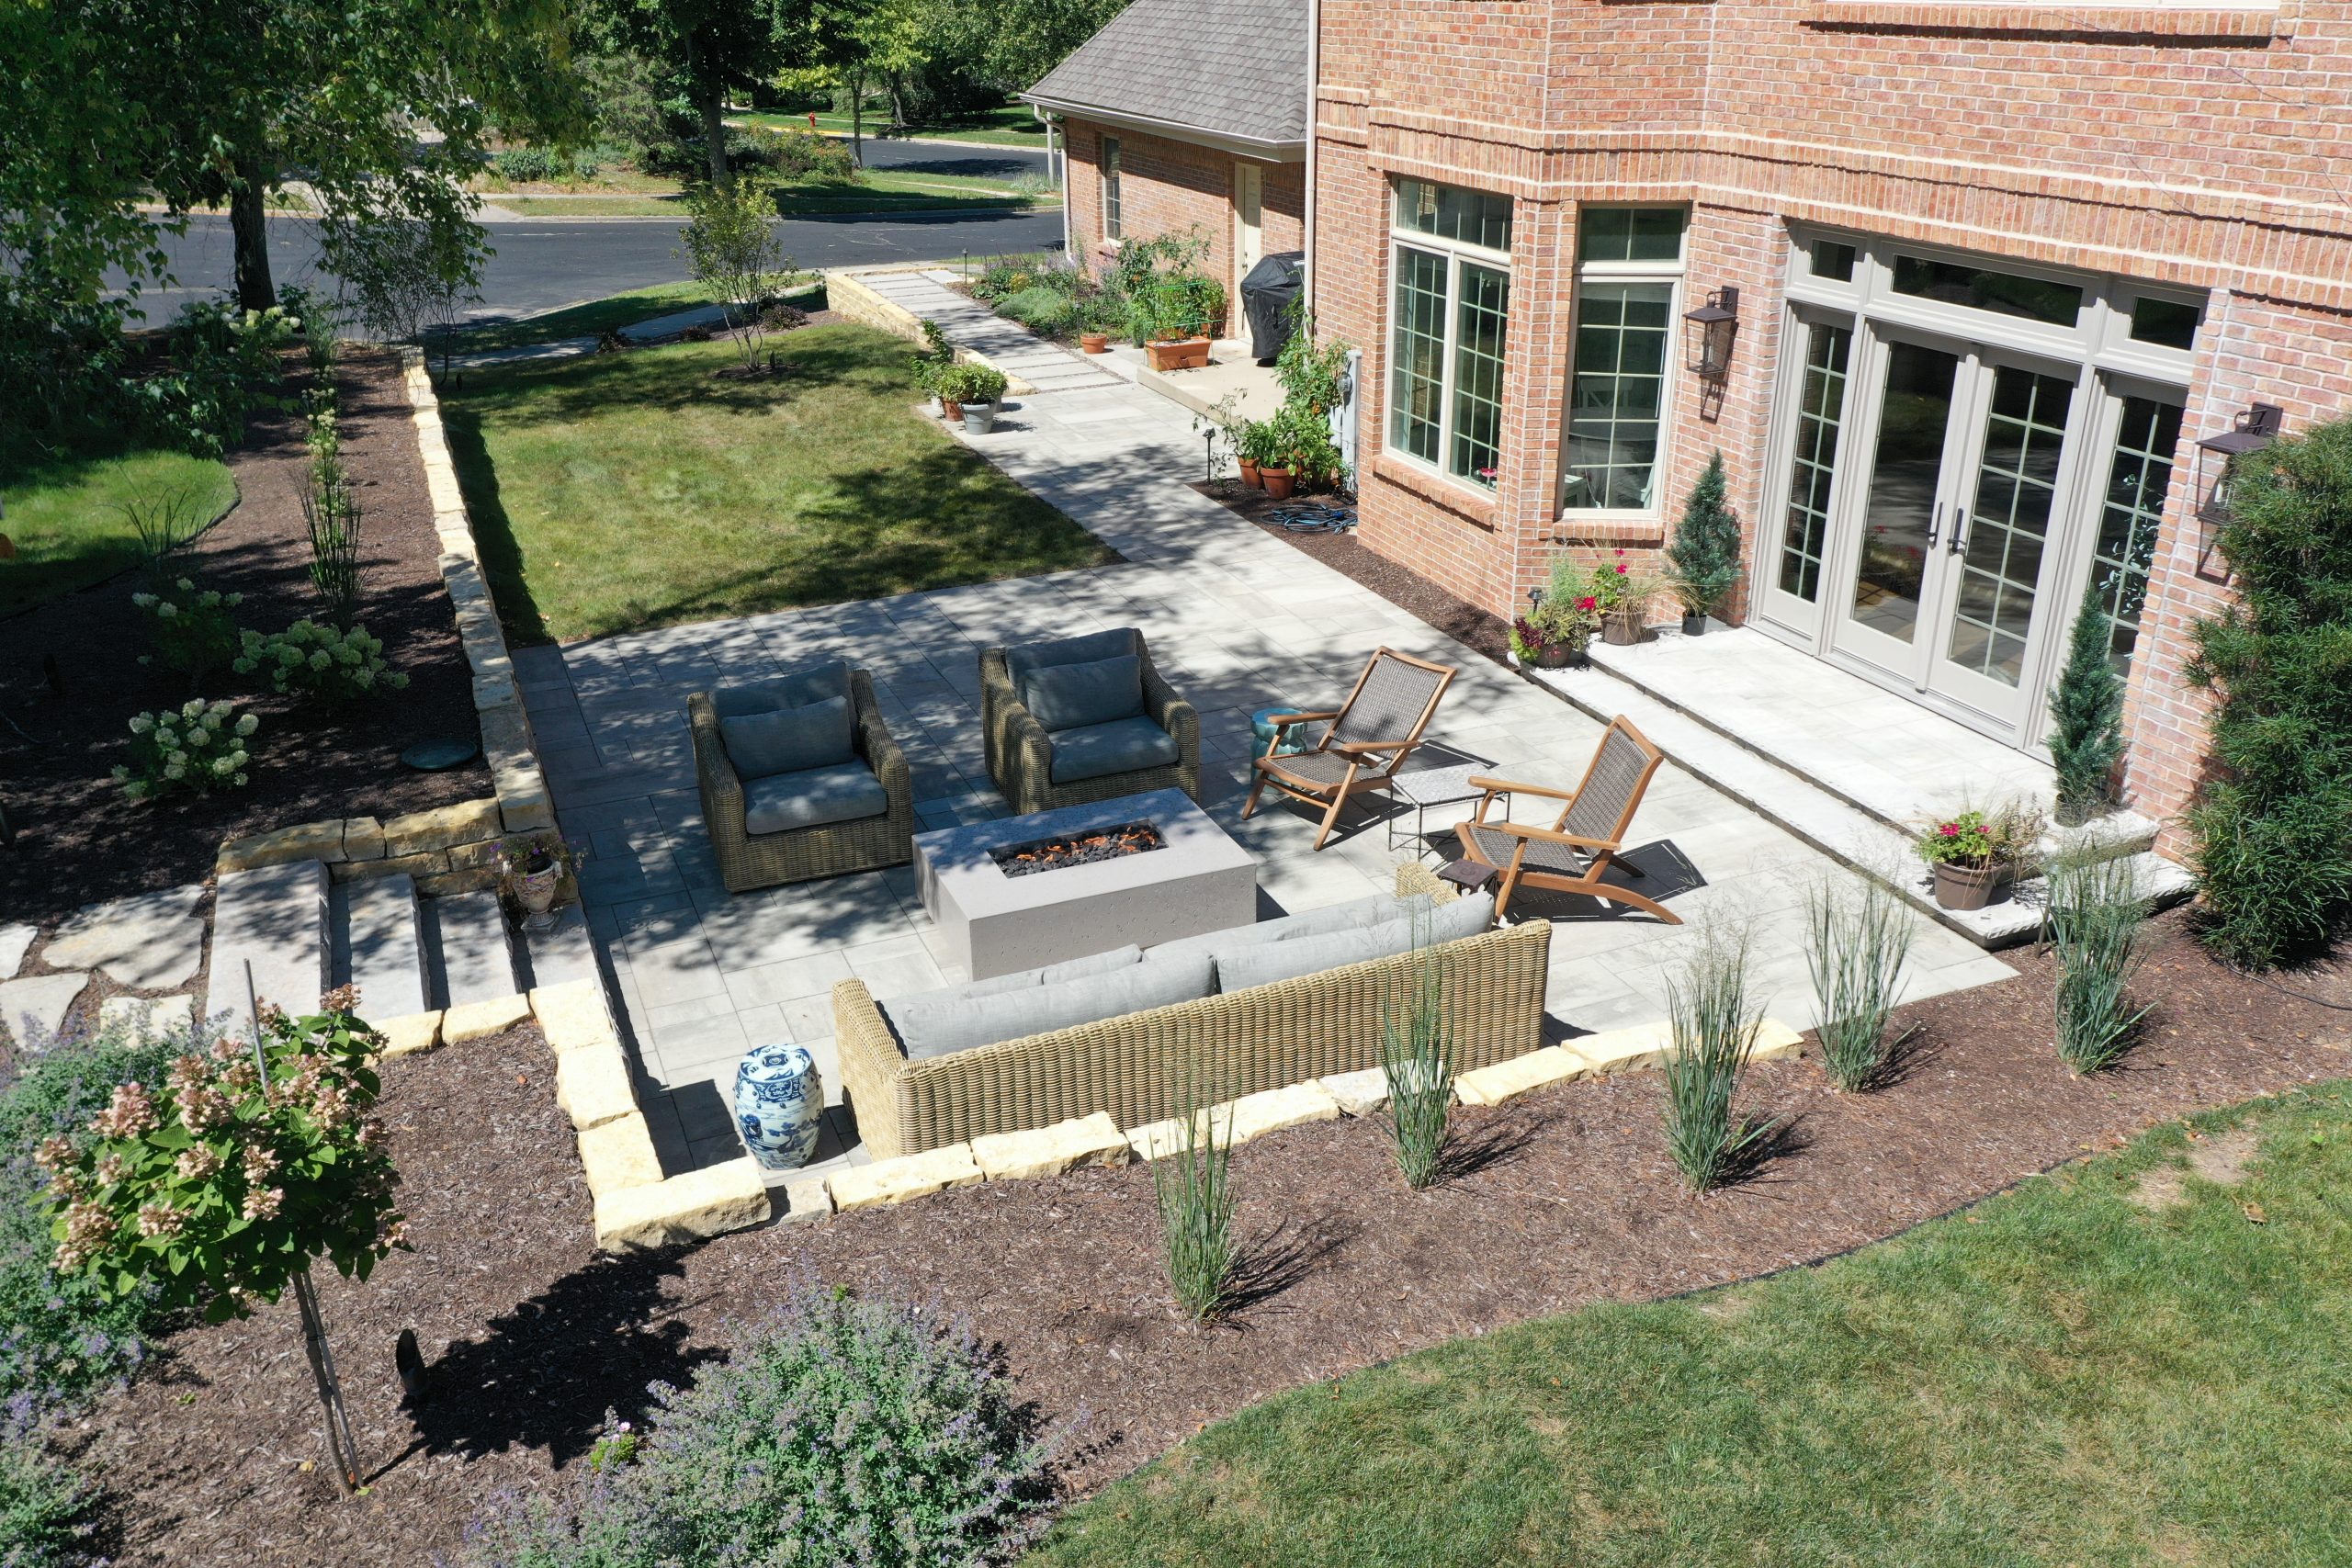 Remodeled outdoor living space with seating and landscape Carrington Lawn & Landscape in Middleton, WI